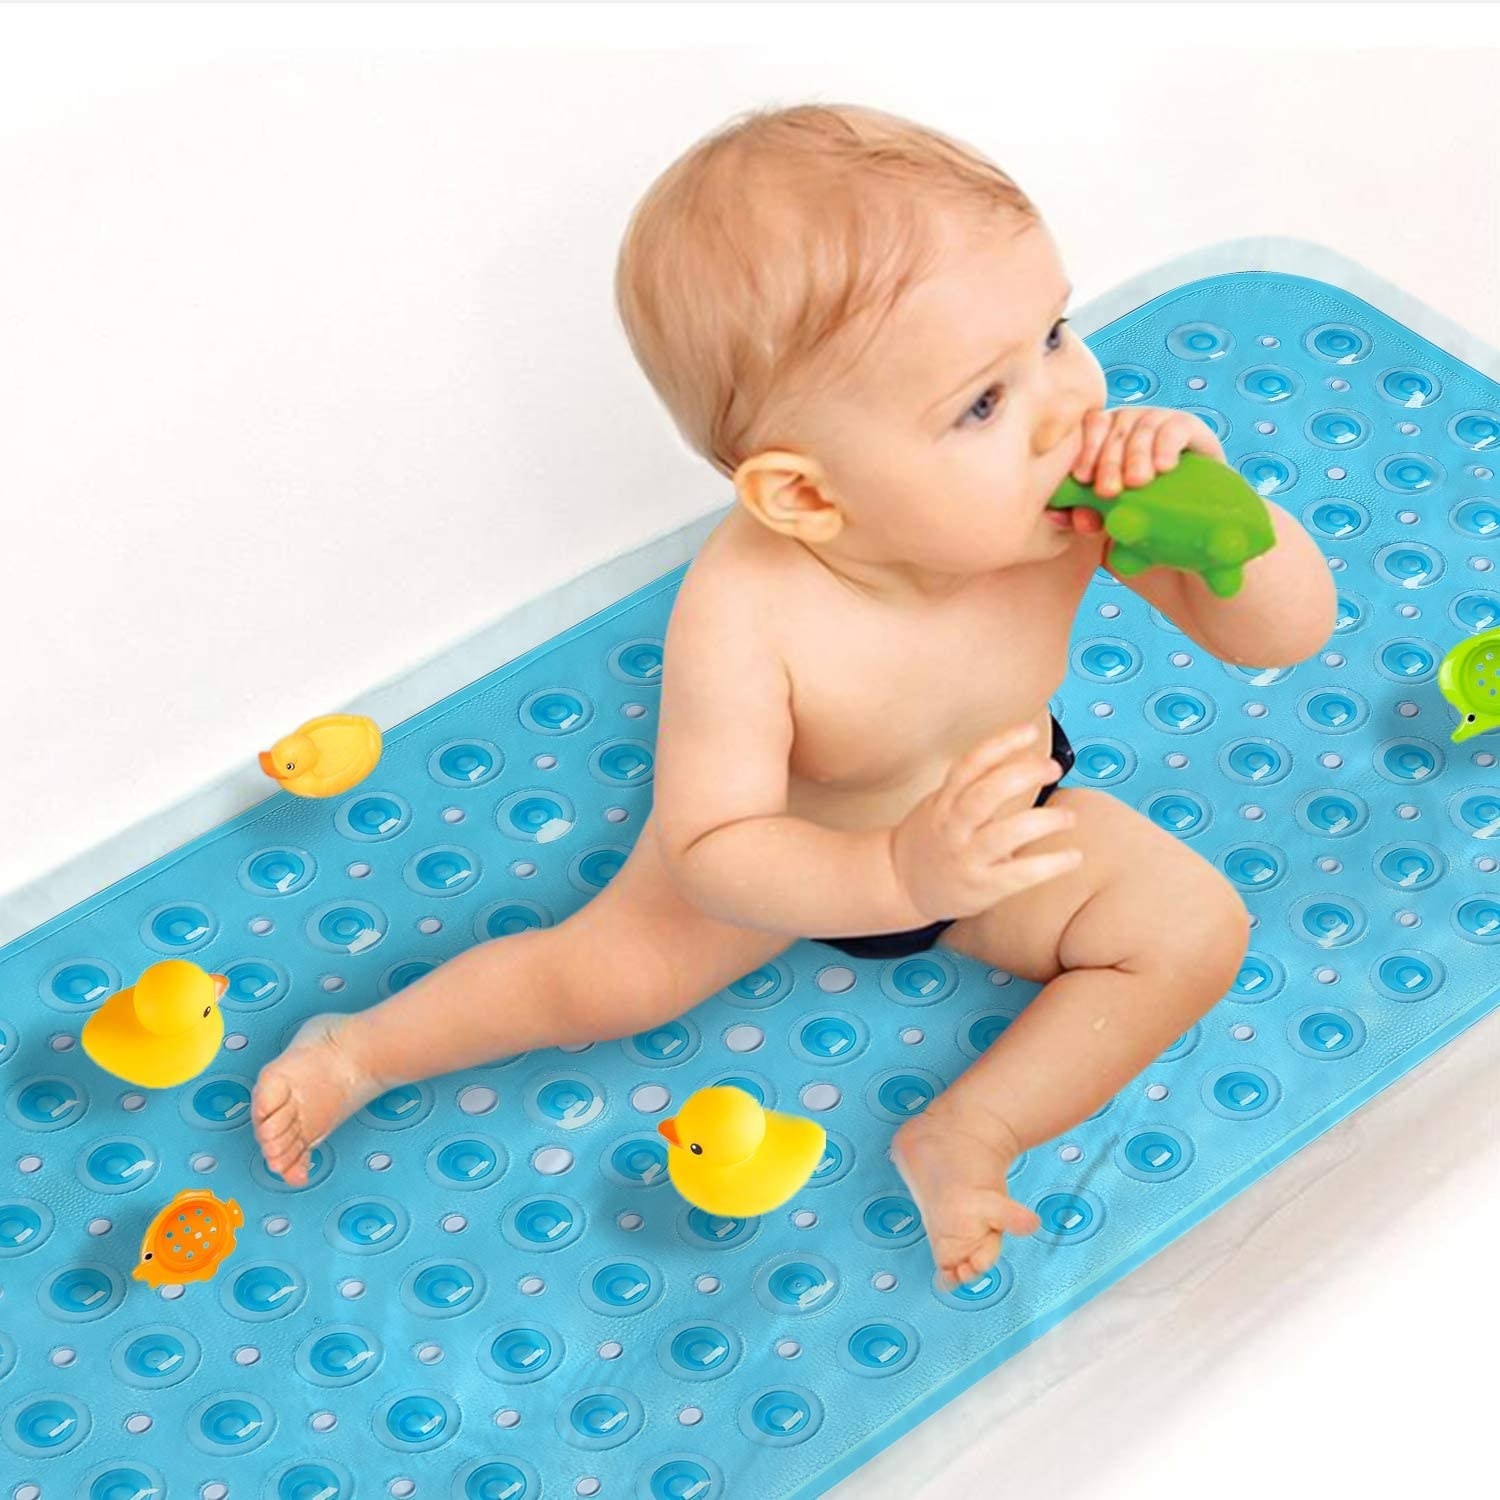 A child model sitting on the non-slip mat in the bathtub